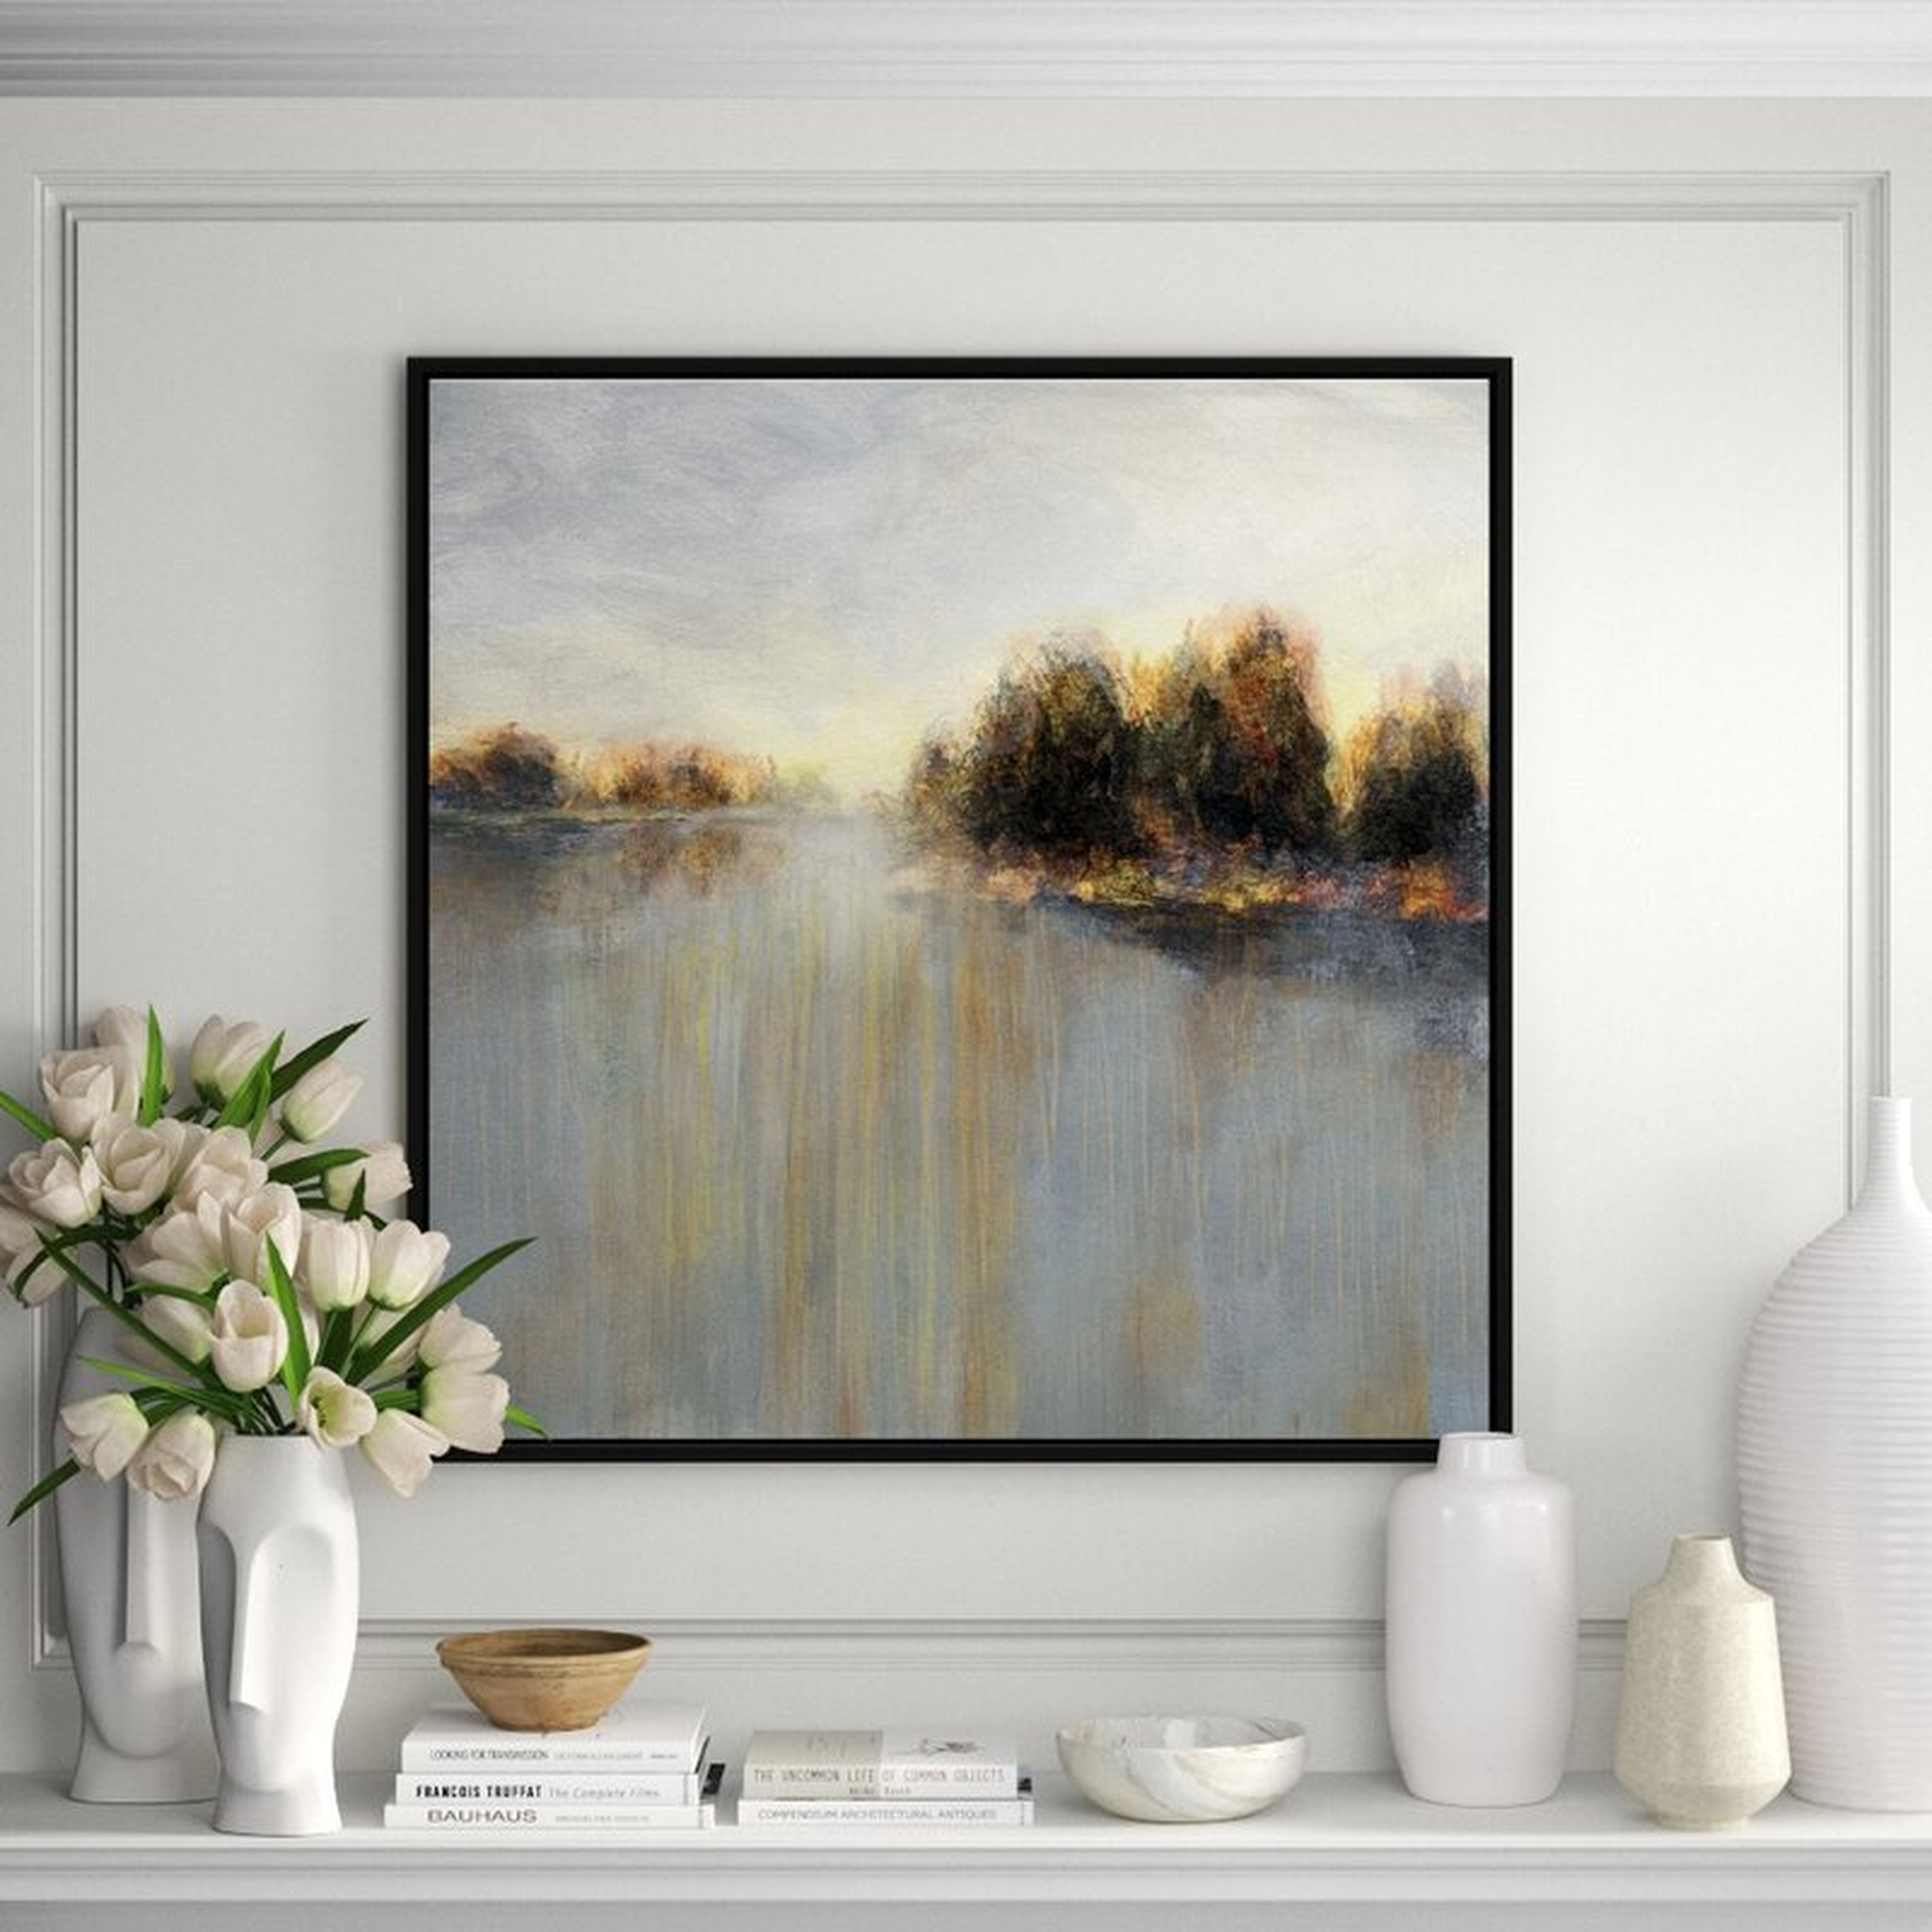 JBass Grand Gallery Collection 'Rainy Sunset II' Framed Print on Canvas - Perigold